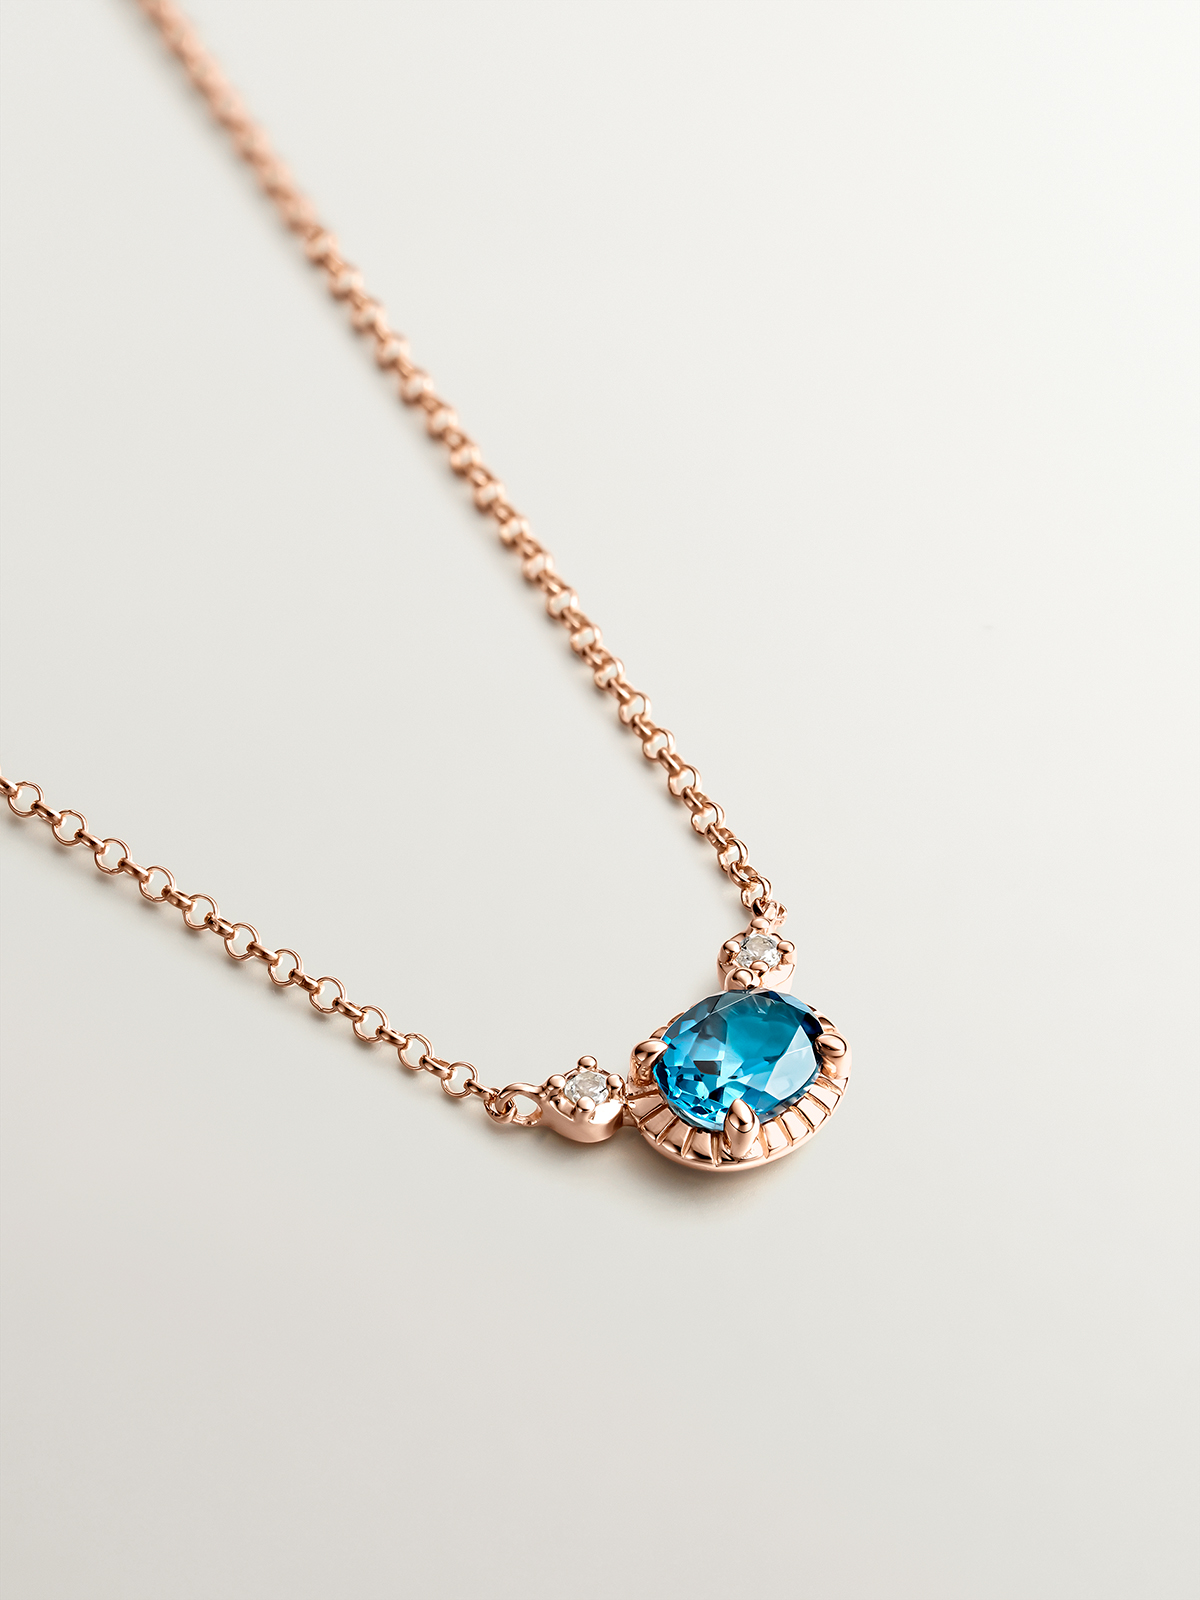 925 Silver pendant dipped in 18K rose gold with London blue and white topazes.